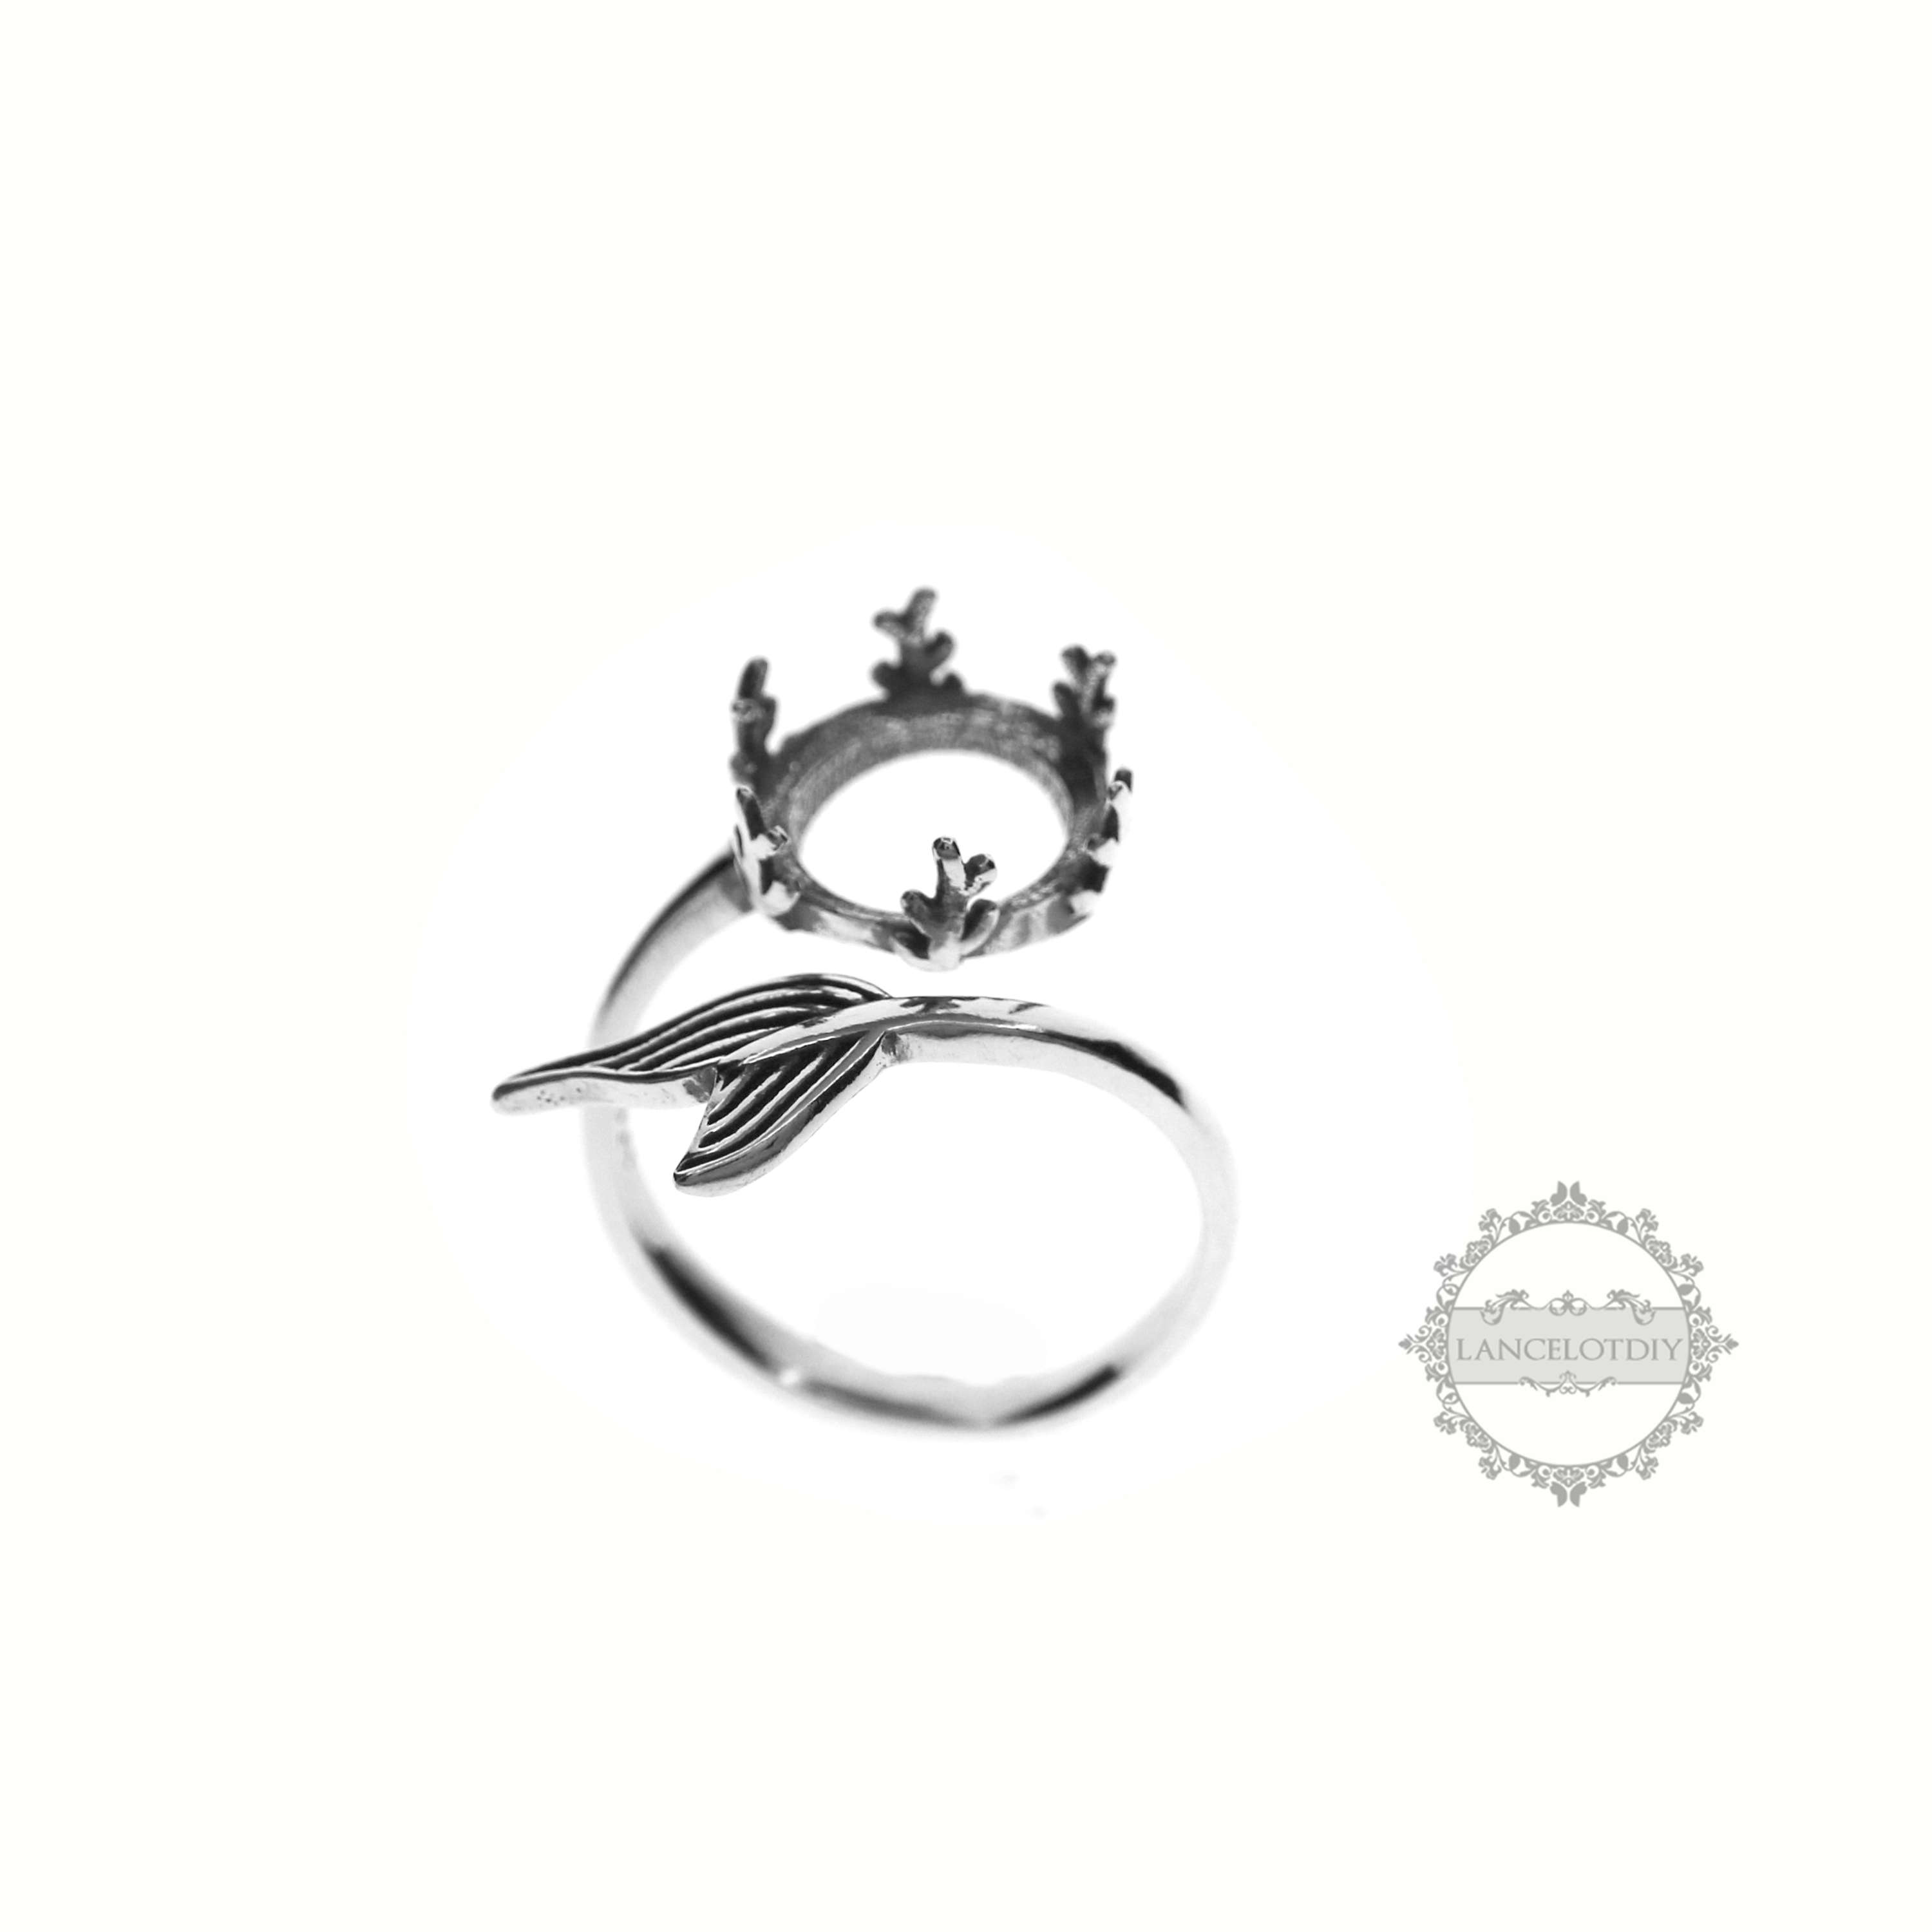 1Pcs 10MM Round Crown Bezel Mermaid Tail Antiqued Solid 925 Sterling Silver Adjustable Ring Settings Supplies 1213043 - Click Image to Close